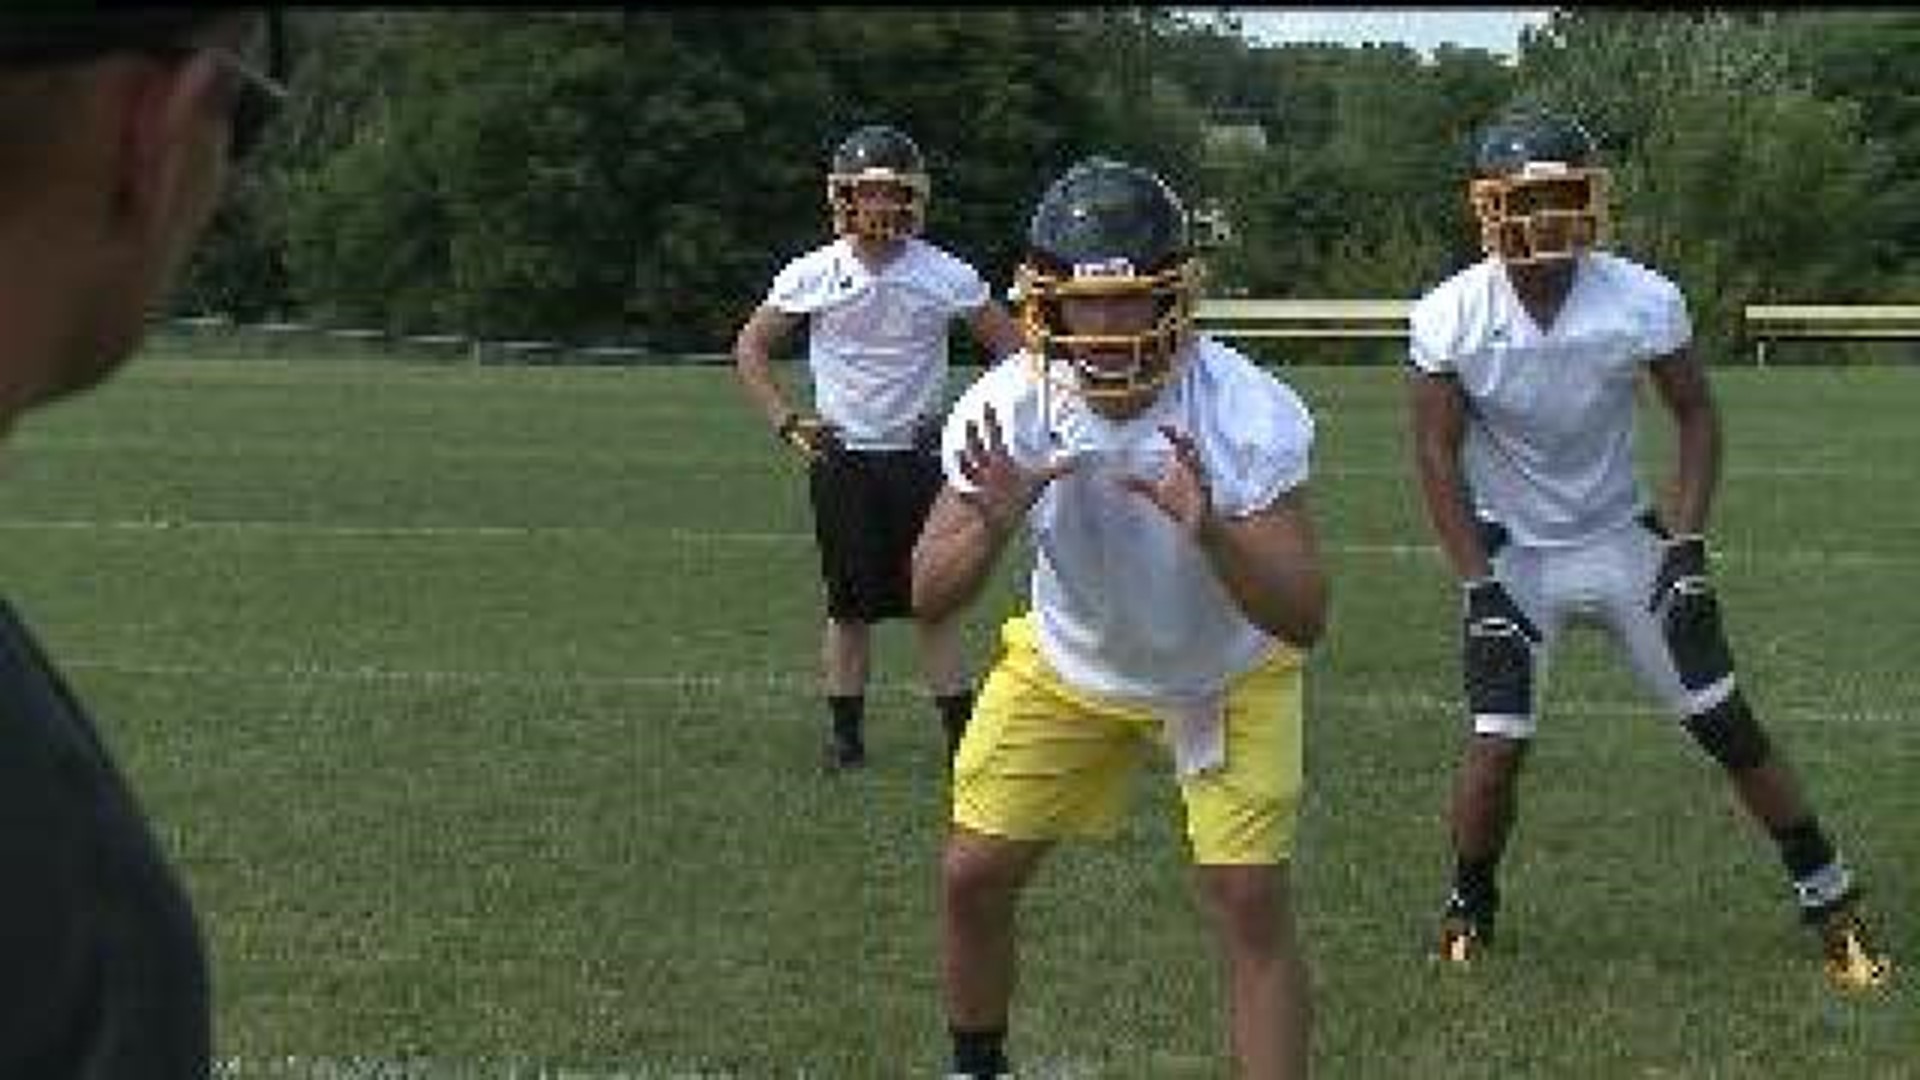 Score Preview- Bettendorf Eager to Bounce Back